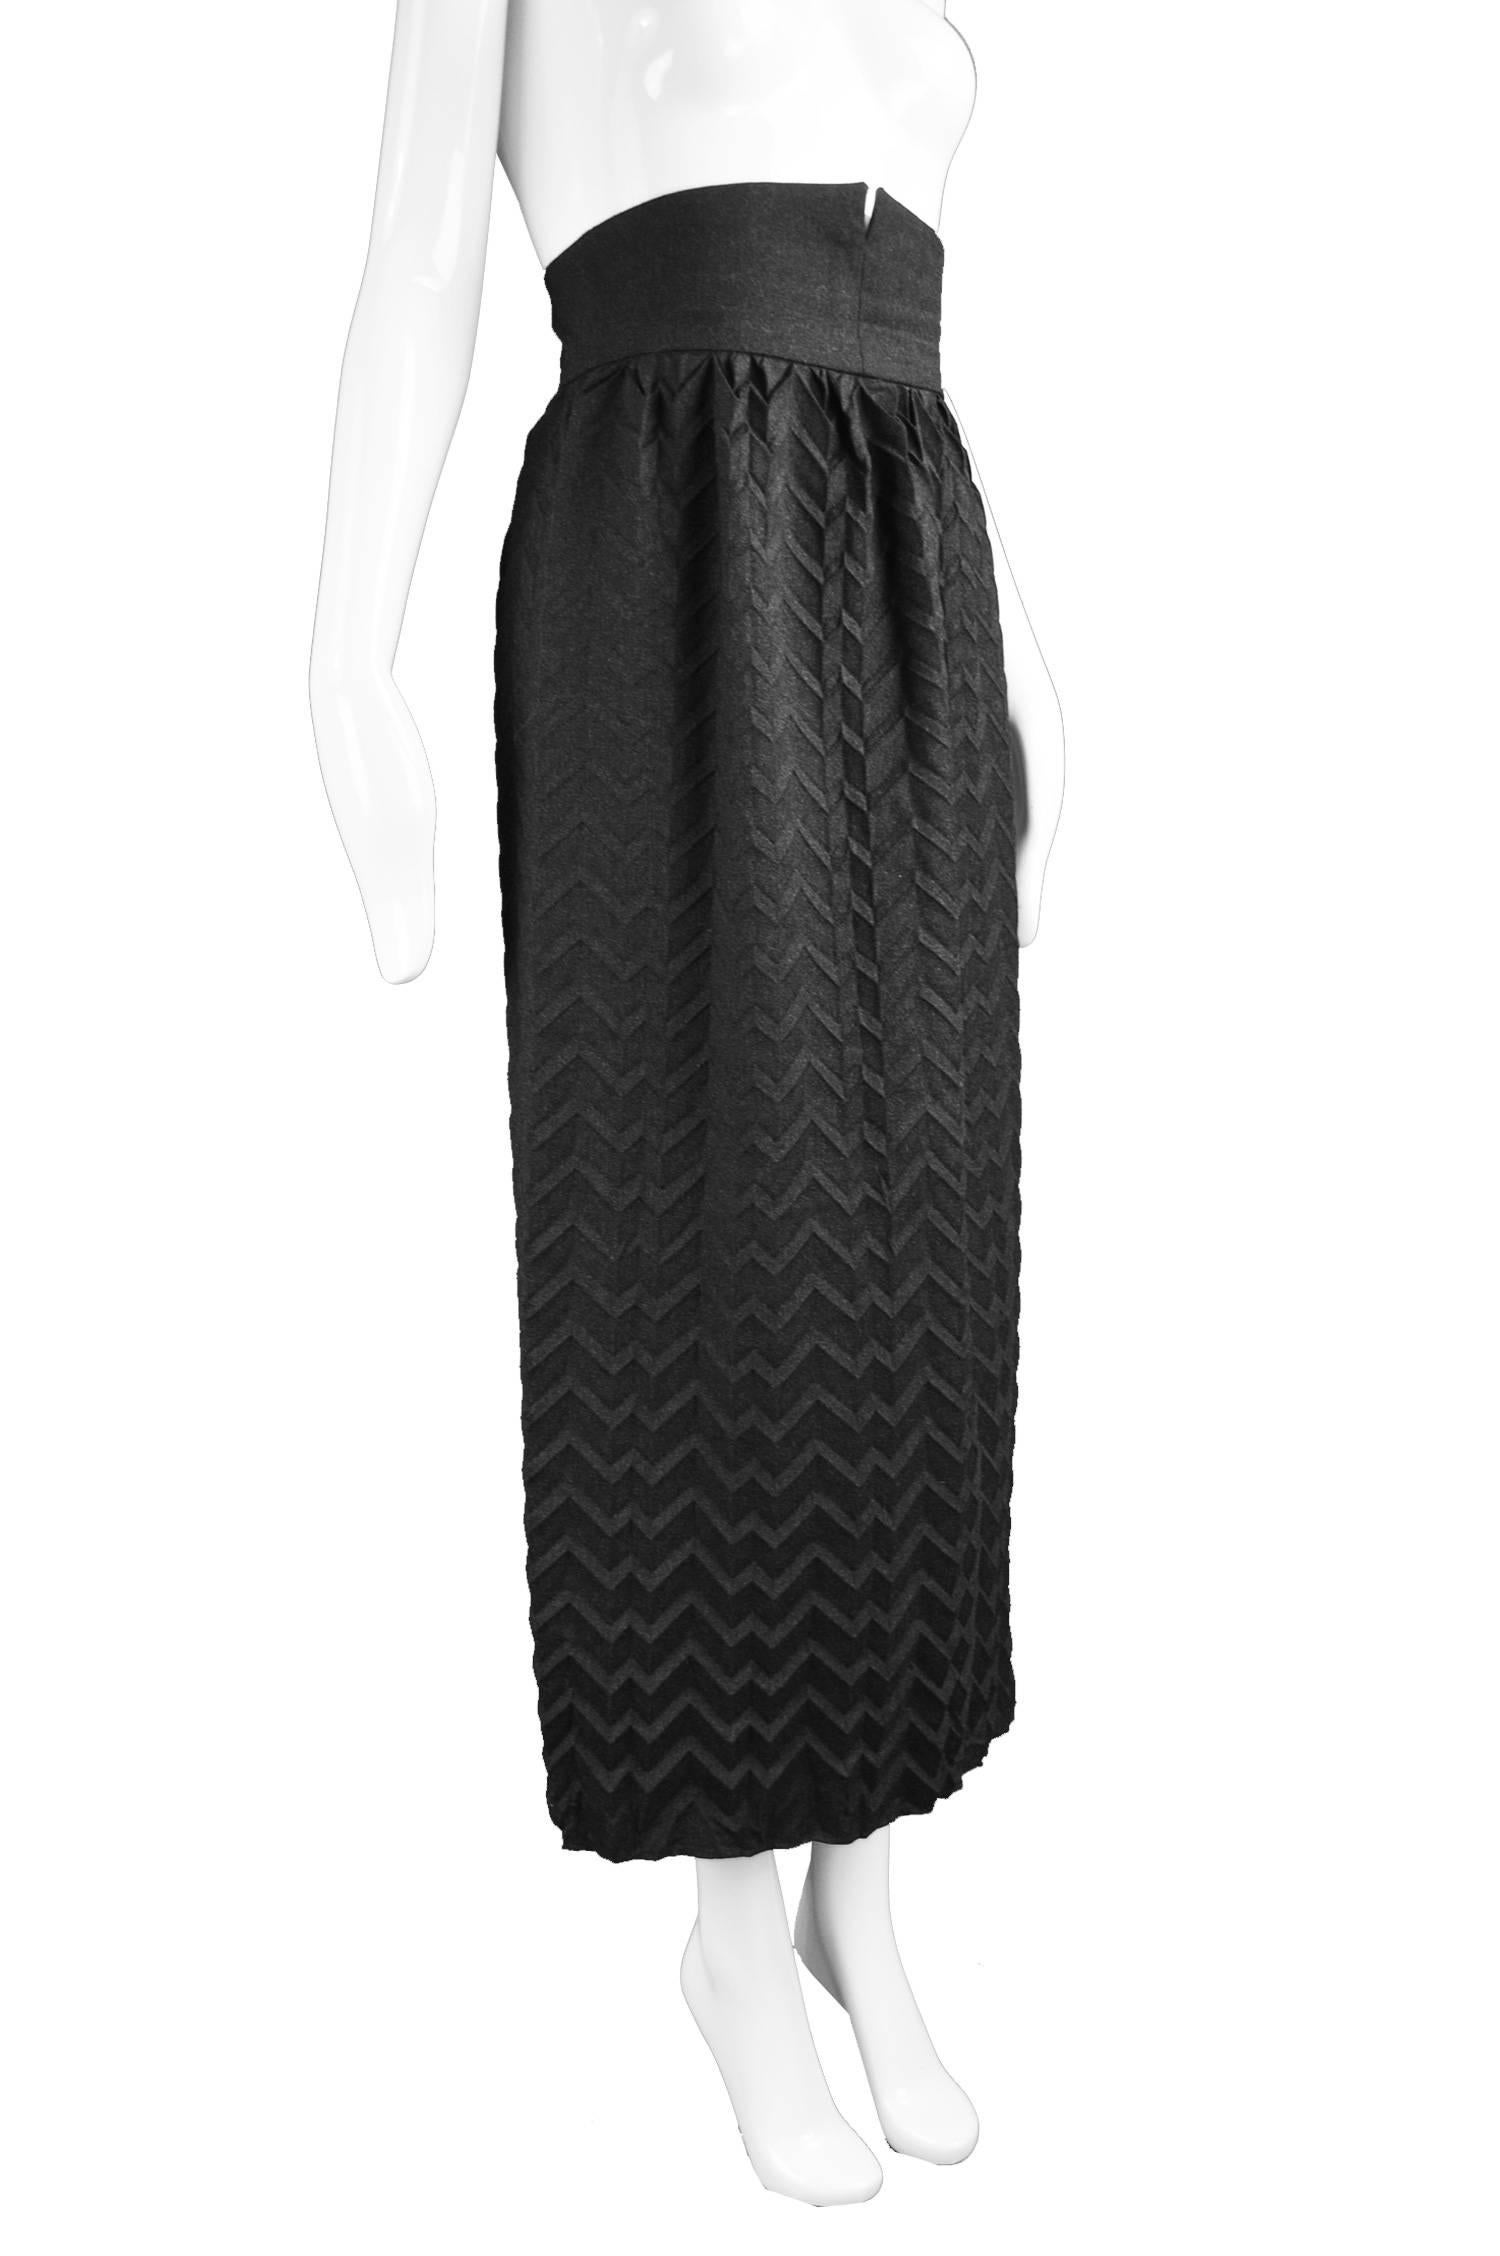 Romeo Gigli Museum Held High Waisted Grey Chevron Pleated Wool Skirt, c.1992 For Sale 1